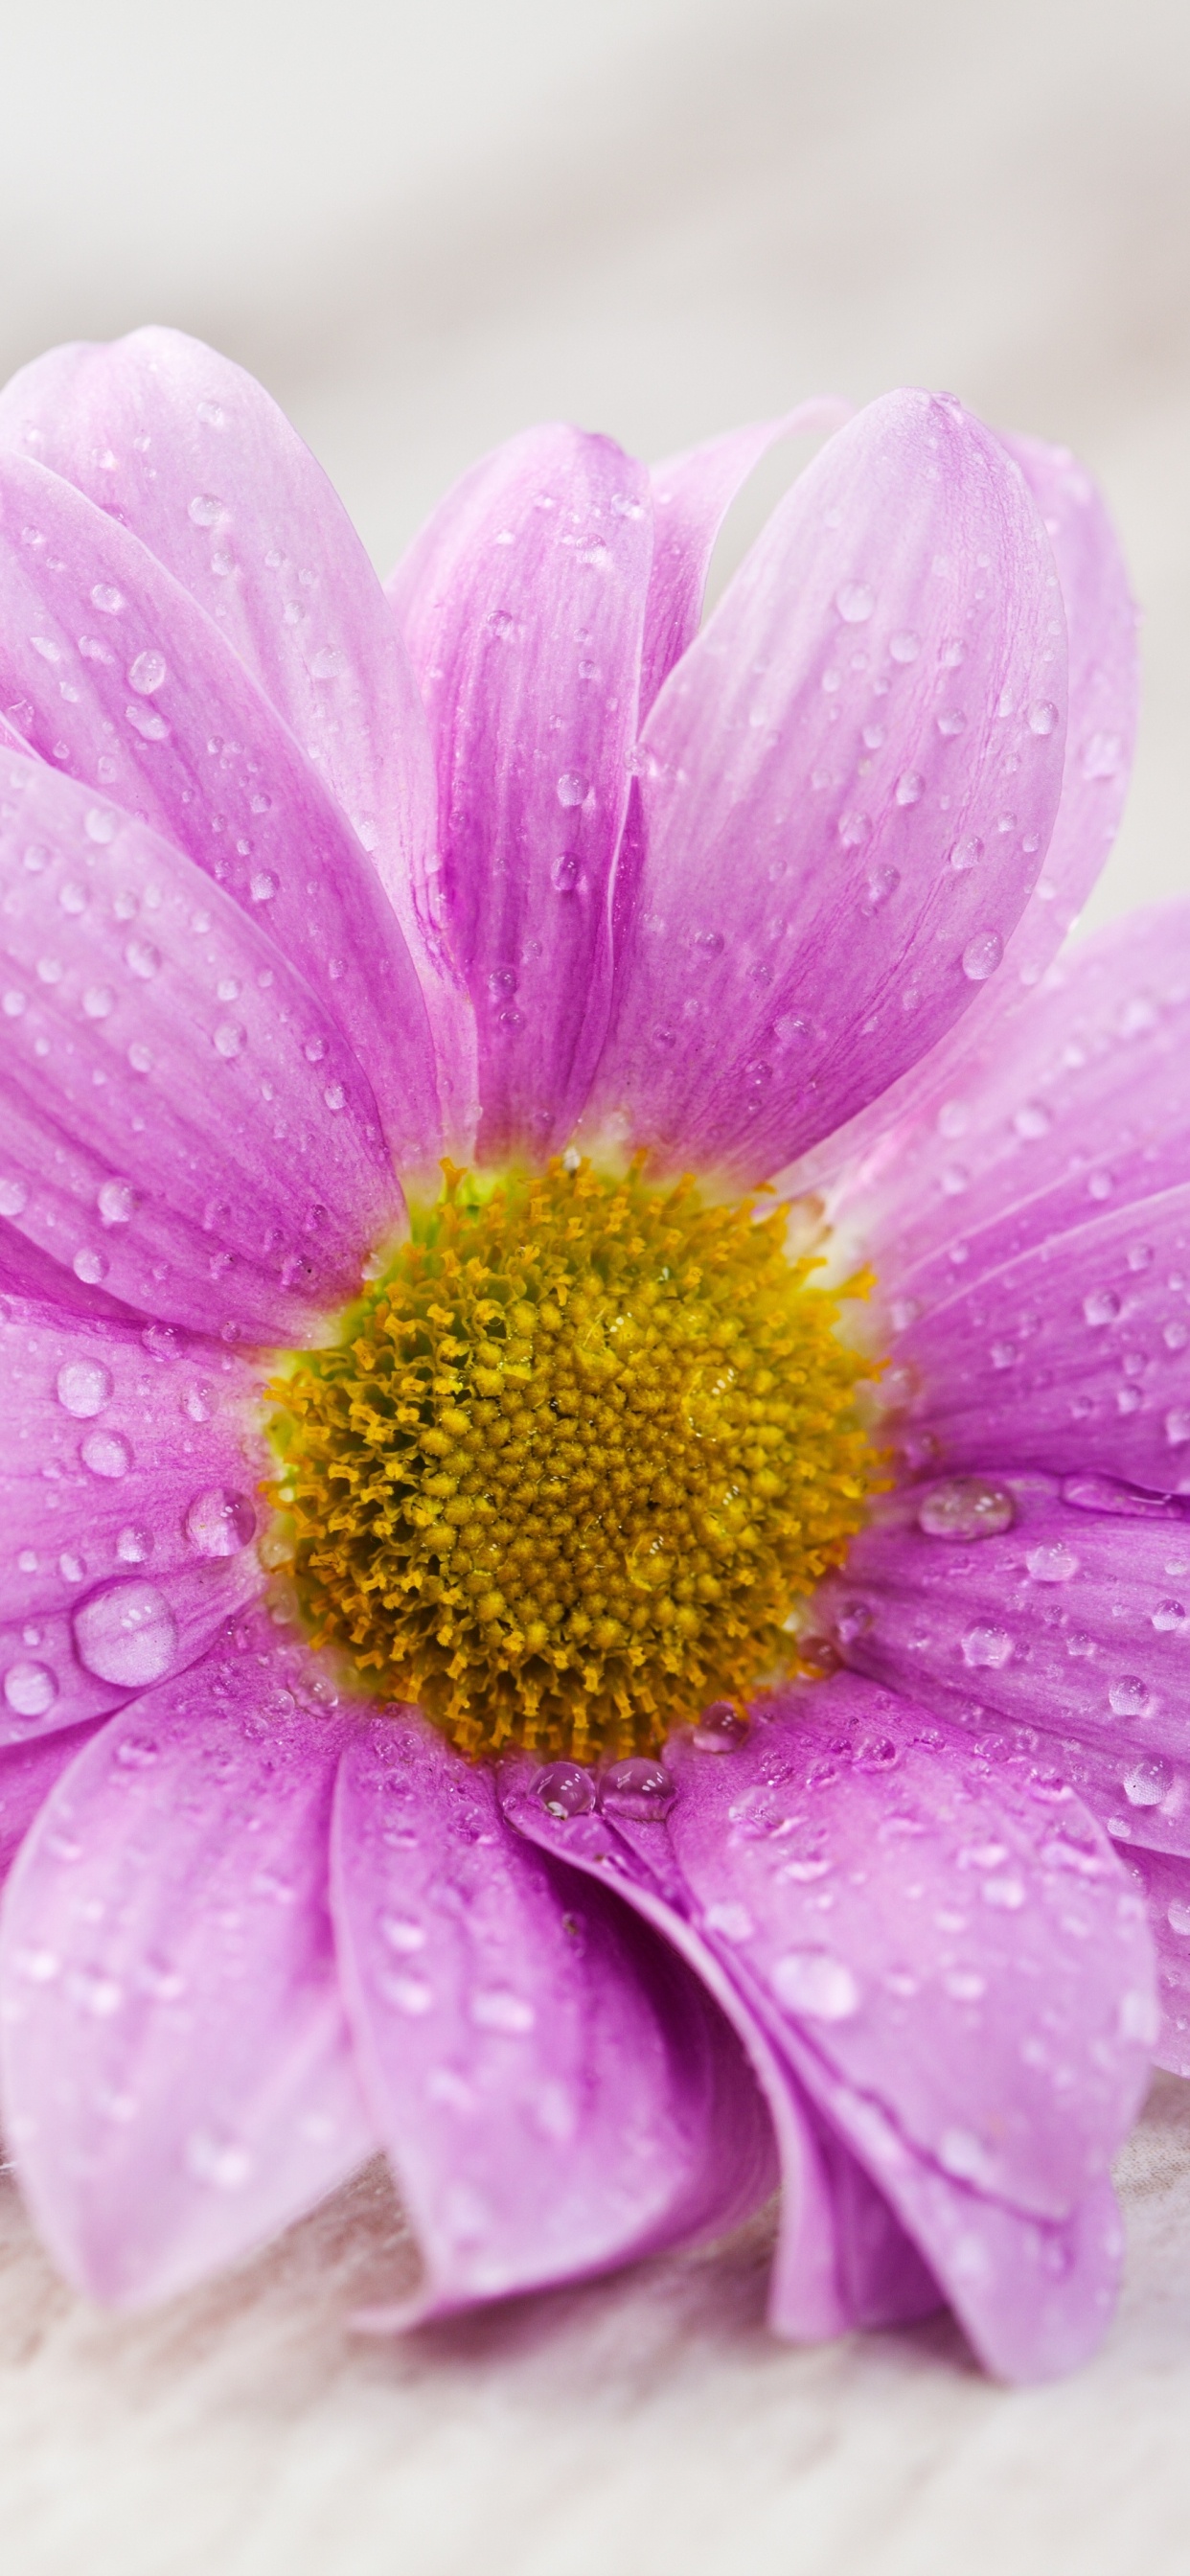 Pink Flower on White Surface. Wallpaper in 1242x2688 Resolution